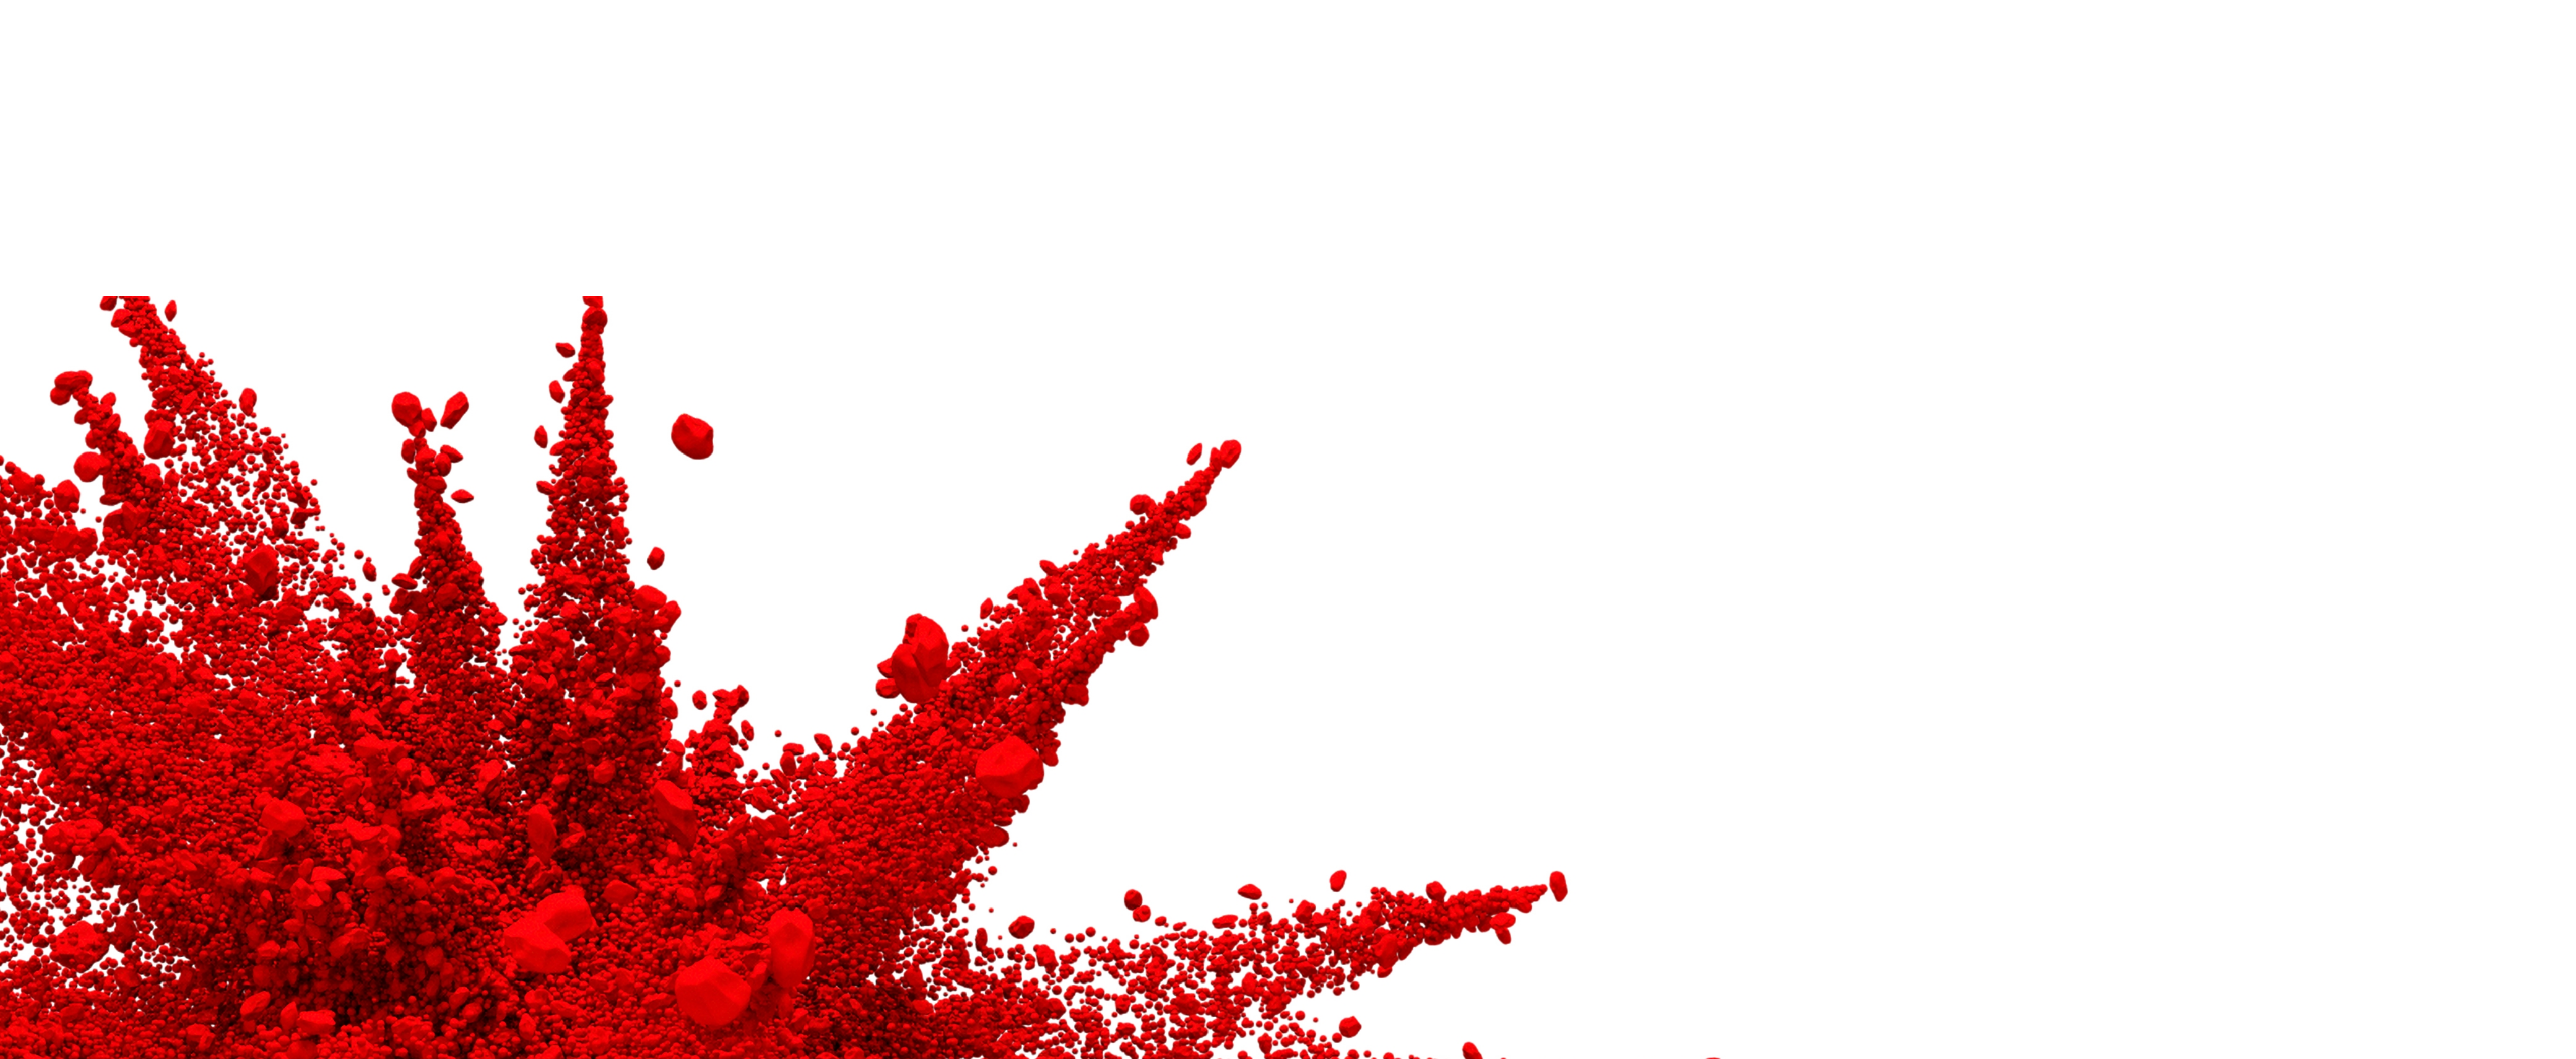 Red powder on white background. Powdered explosion, isolated on white with clipping path. Top view or flat lay.